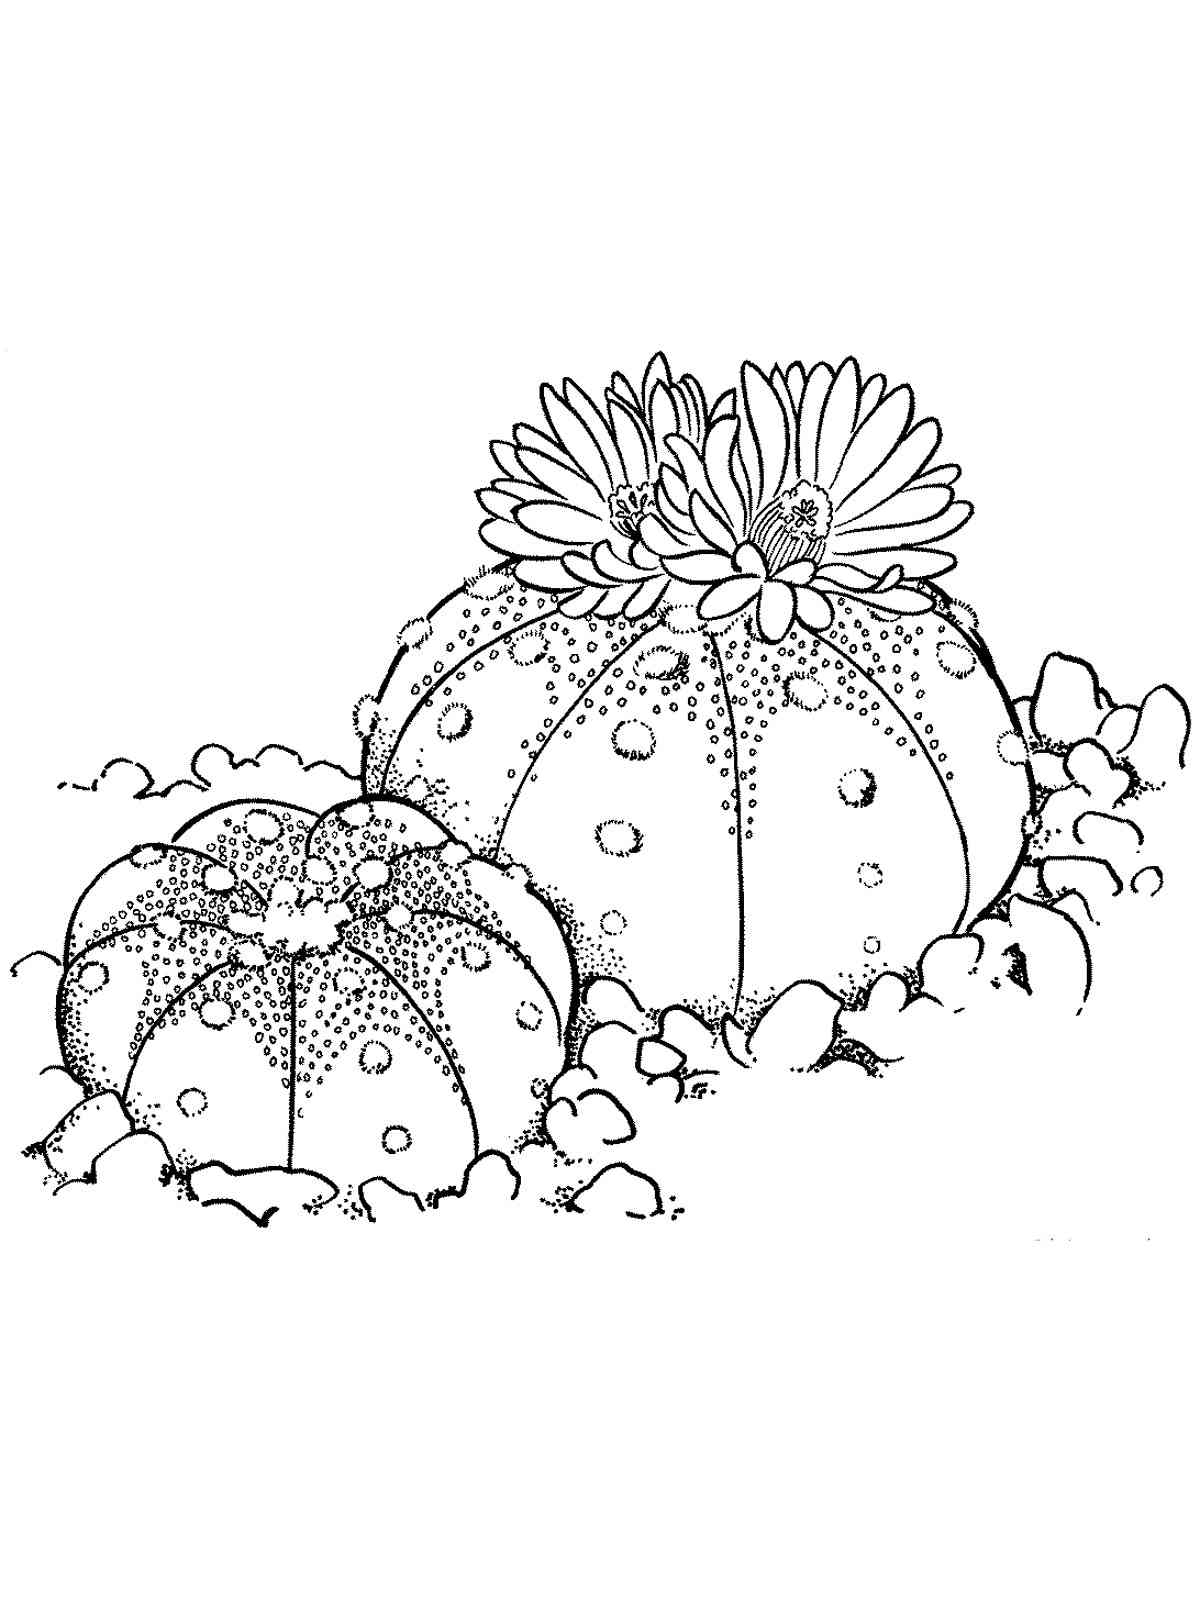 Sand Dollar Cactus coloring page